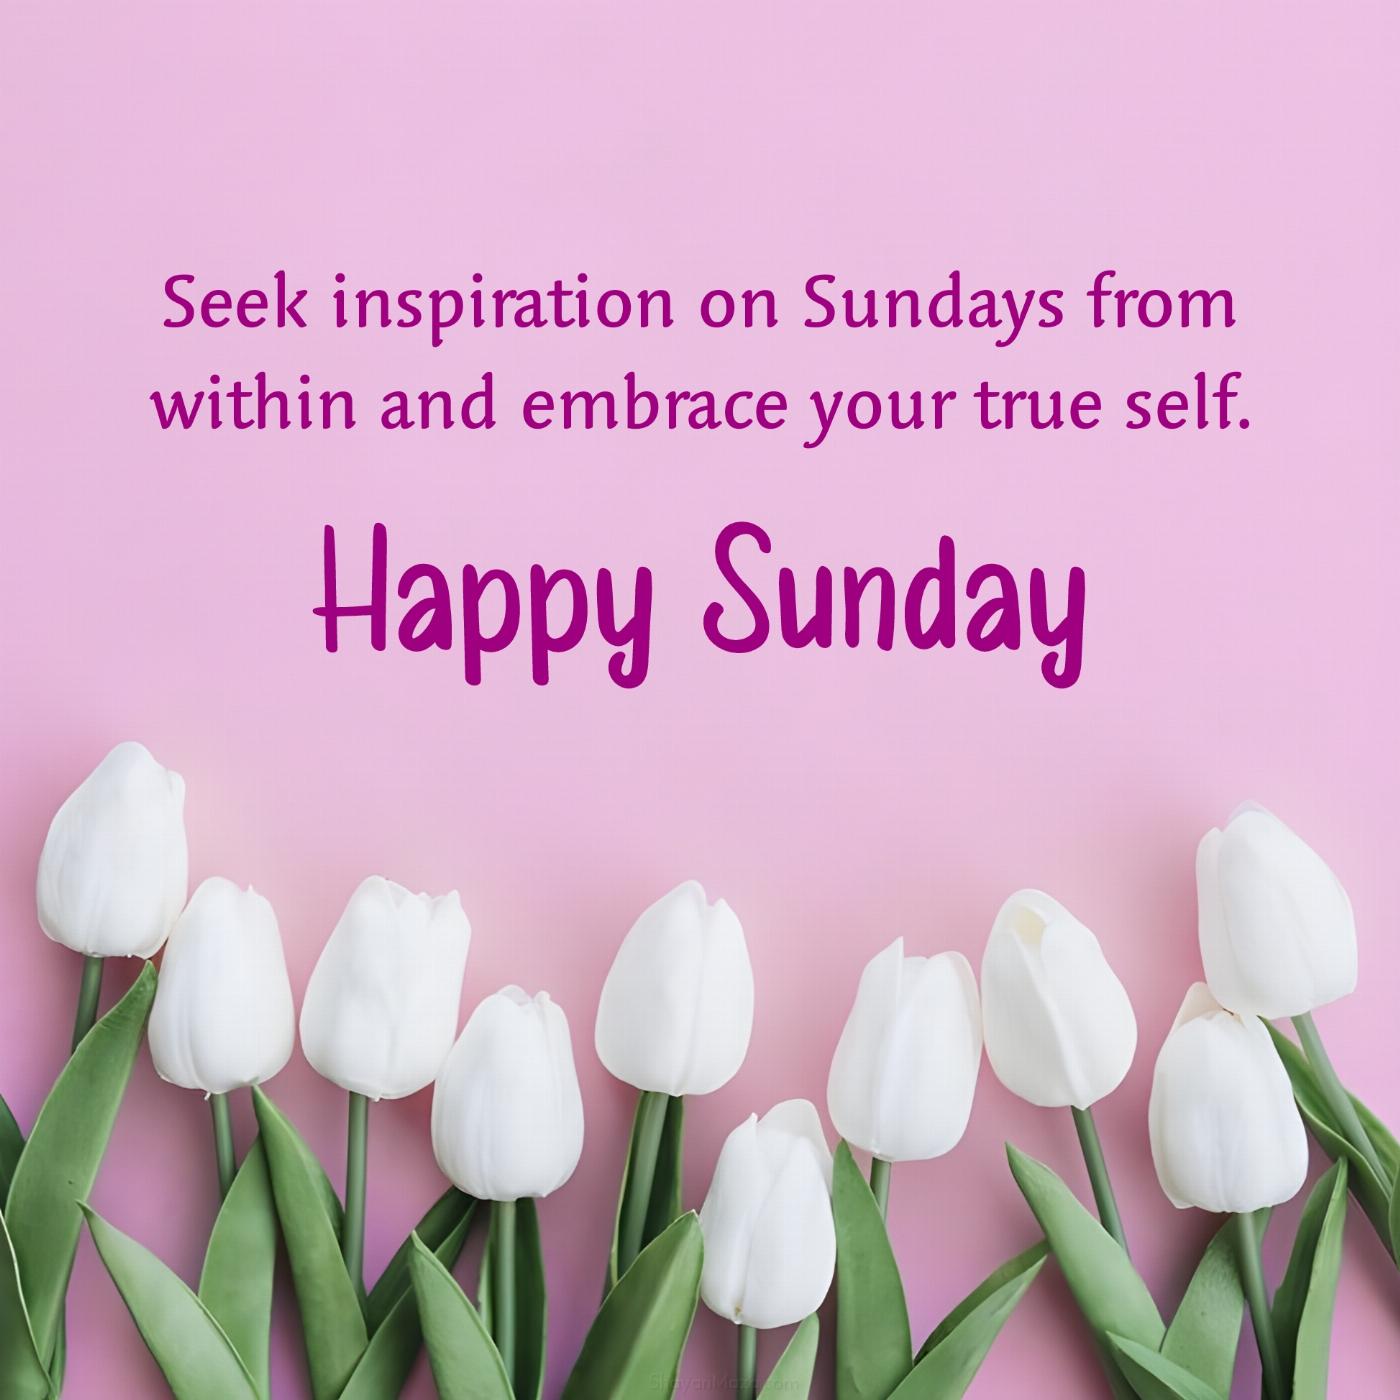 Seek inspiration on Sundays from within and embrace your true self